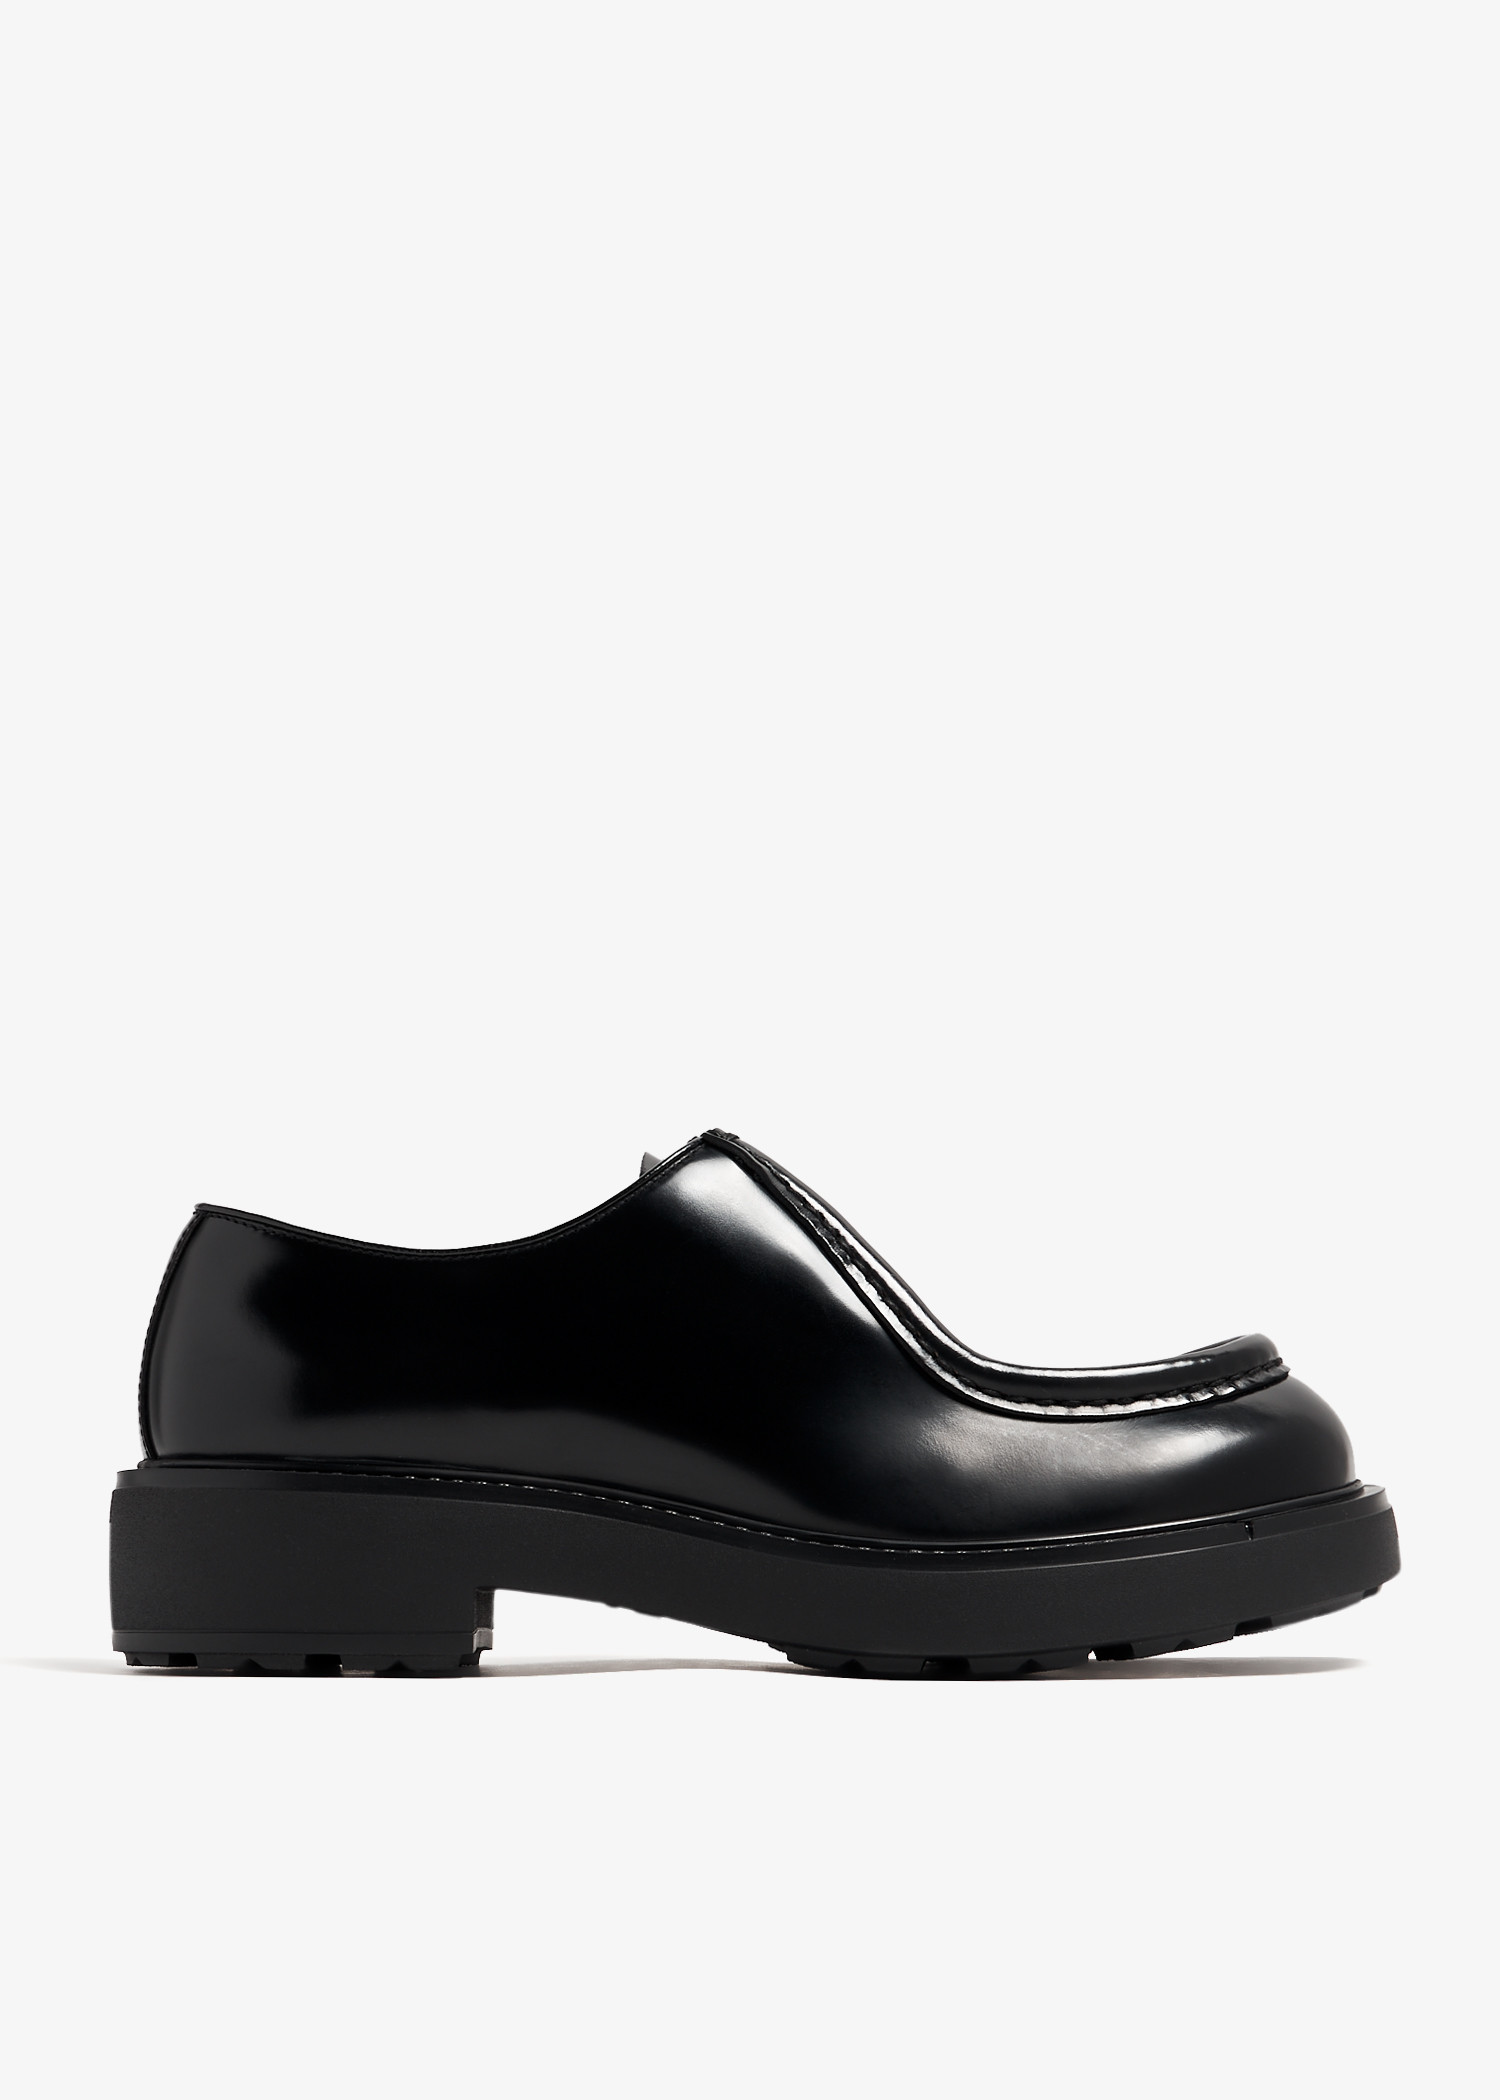 Prada Opaque brushed leather lace-up shoes for Men - Black in KSA 